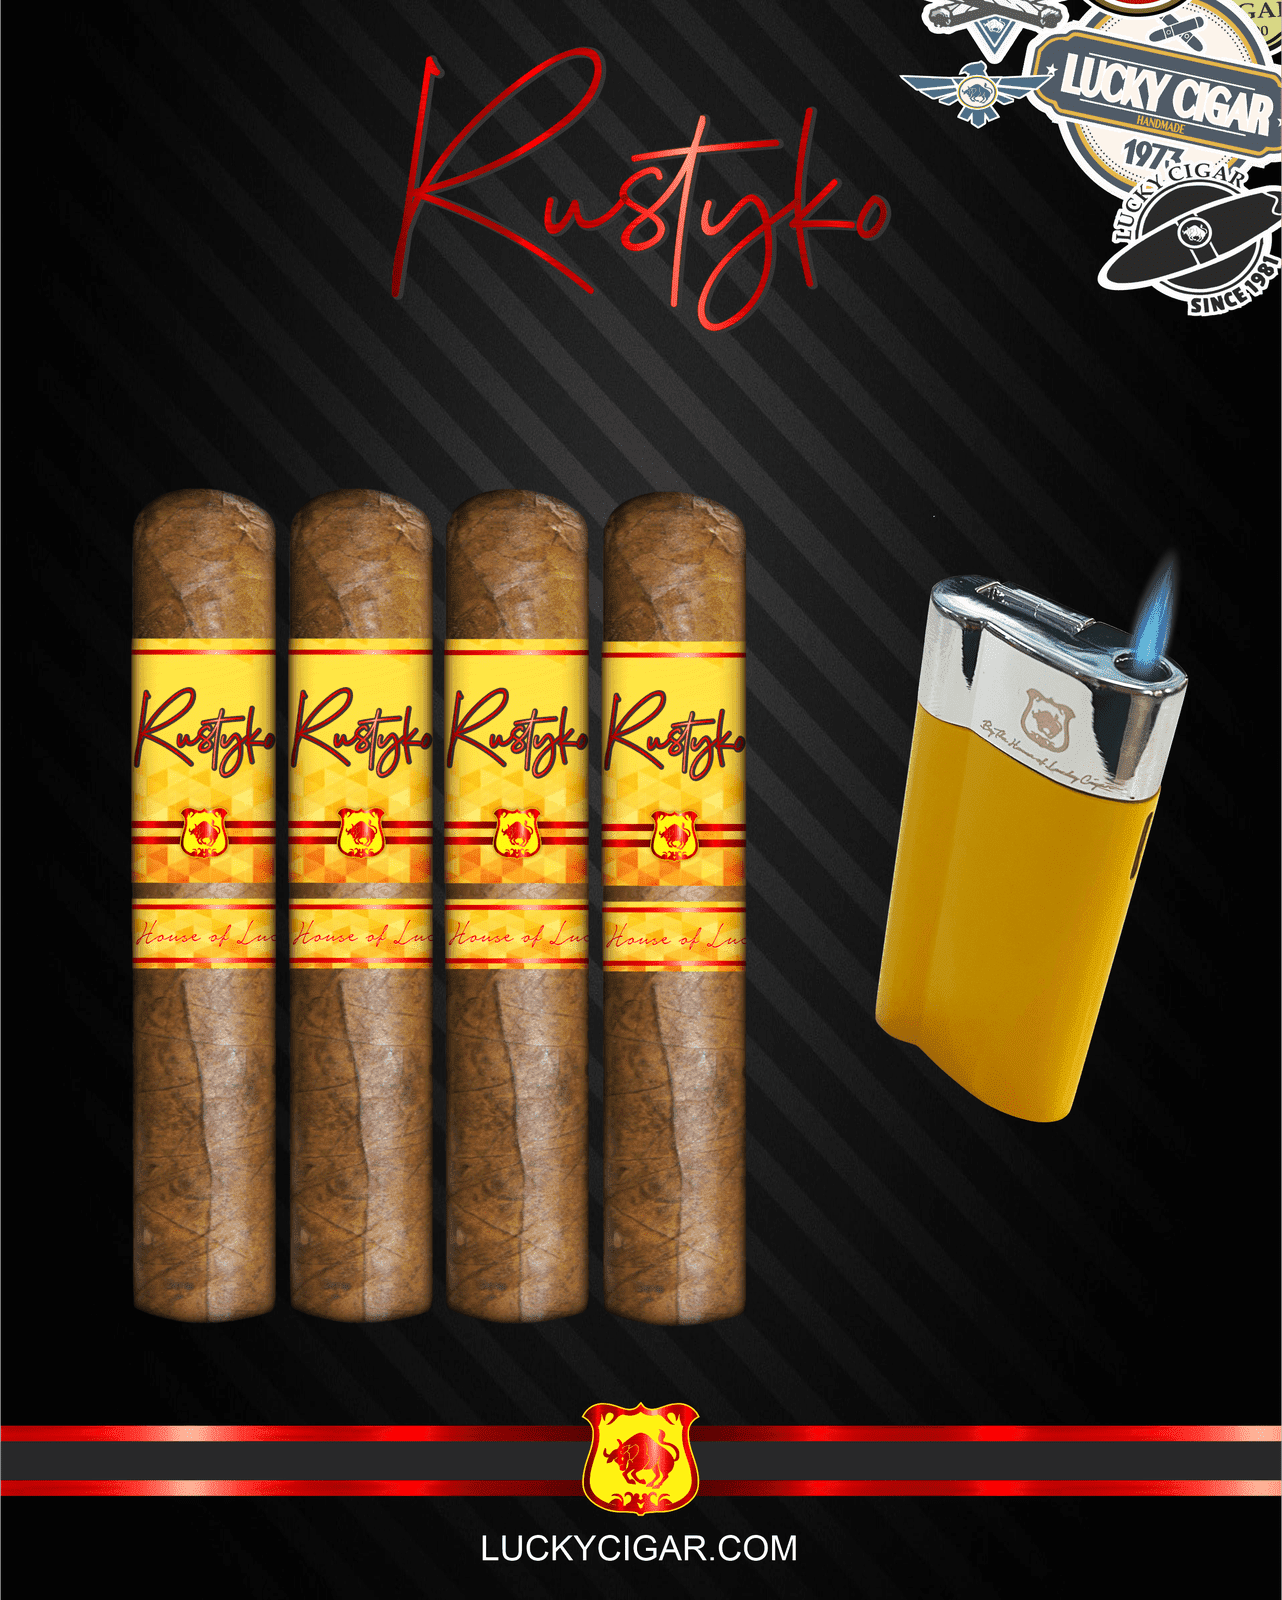 Lucky Cigar Sampler Sets: Set of 4 Rustyko 5x54 Cigars with Torch